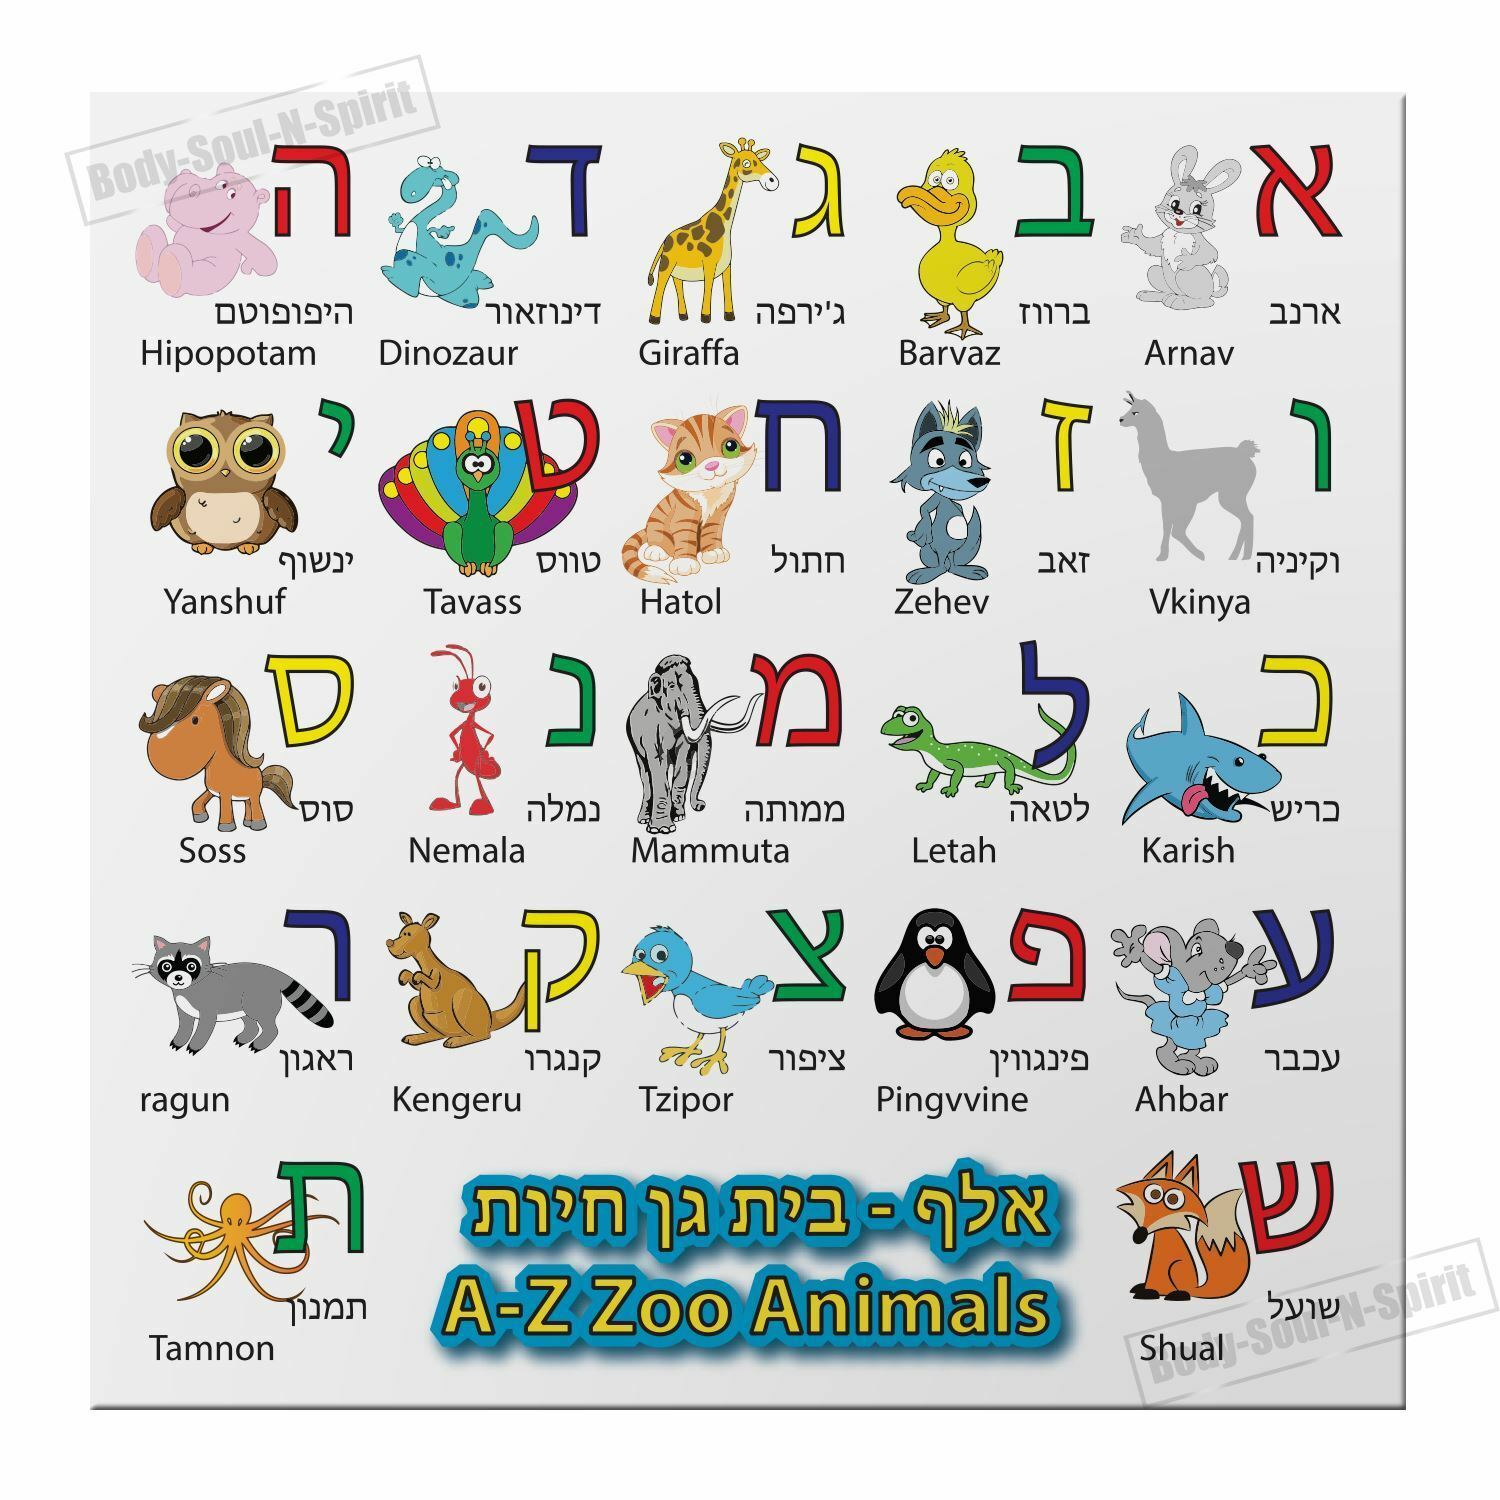 HEBREW Alphabet MAGNET Alef Bet zoo Animals Characters Learn Jewish kids A-Z ABC